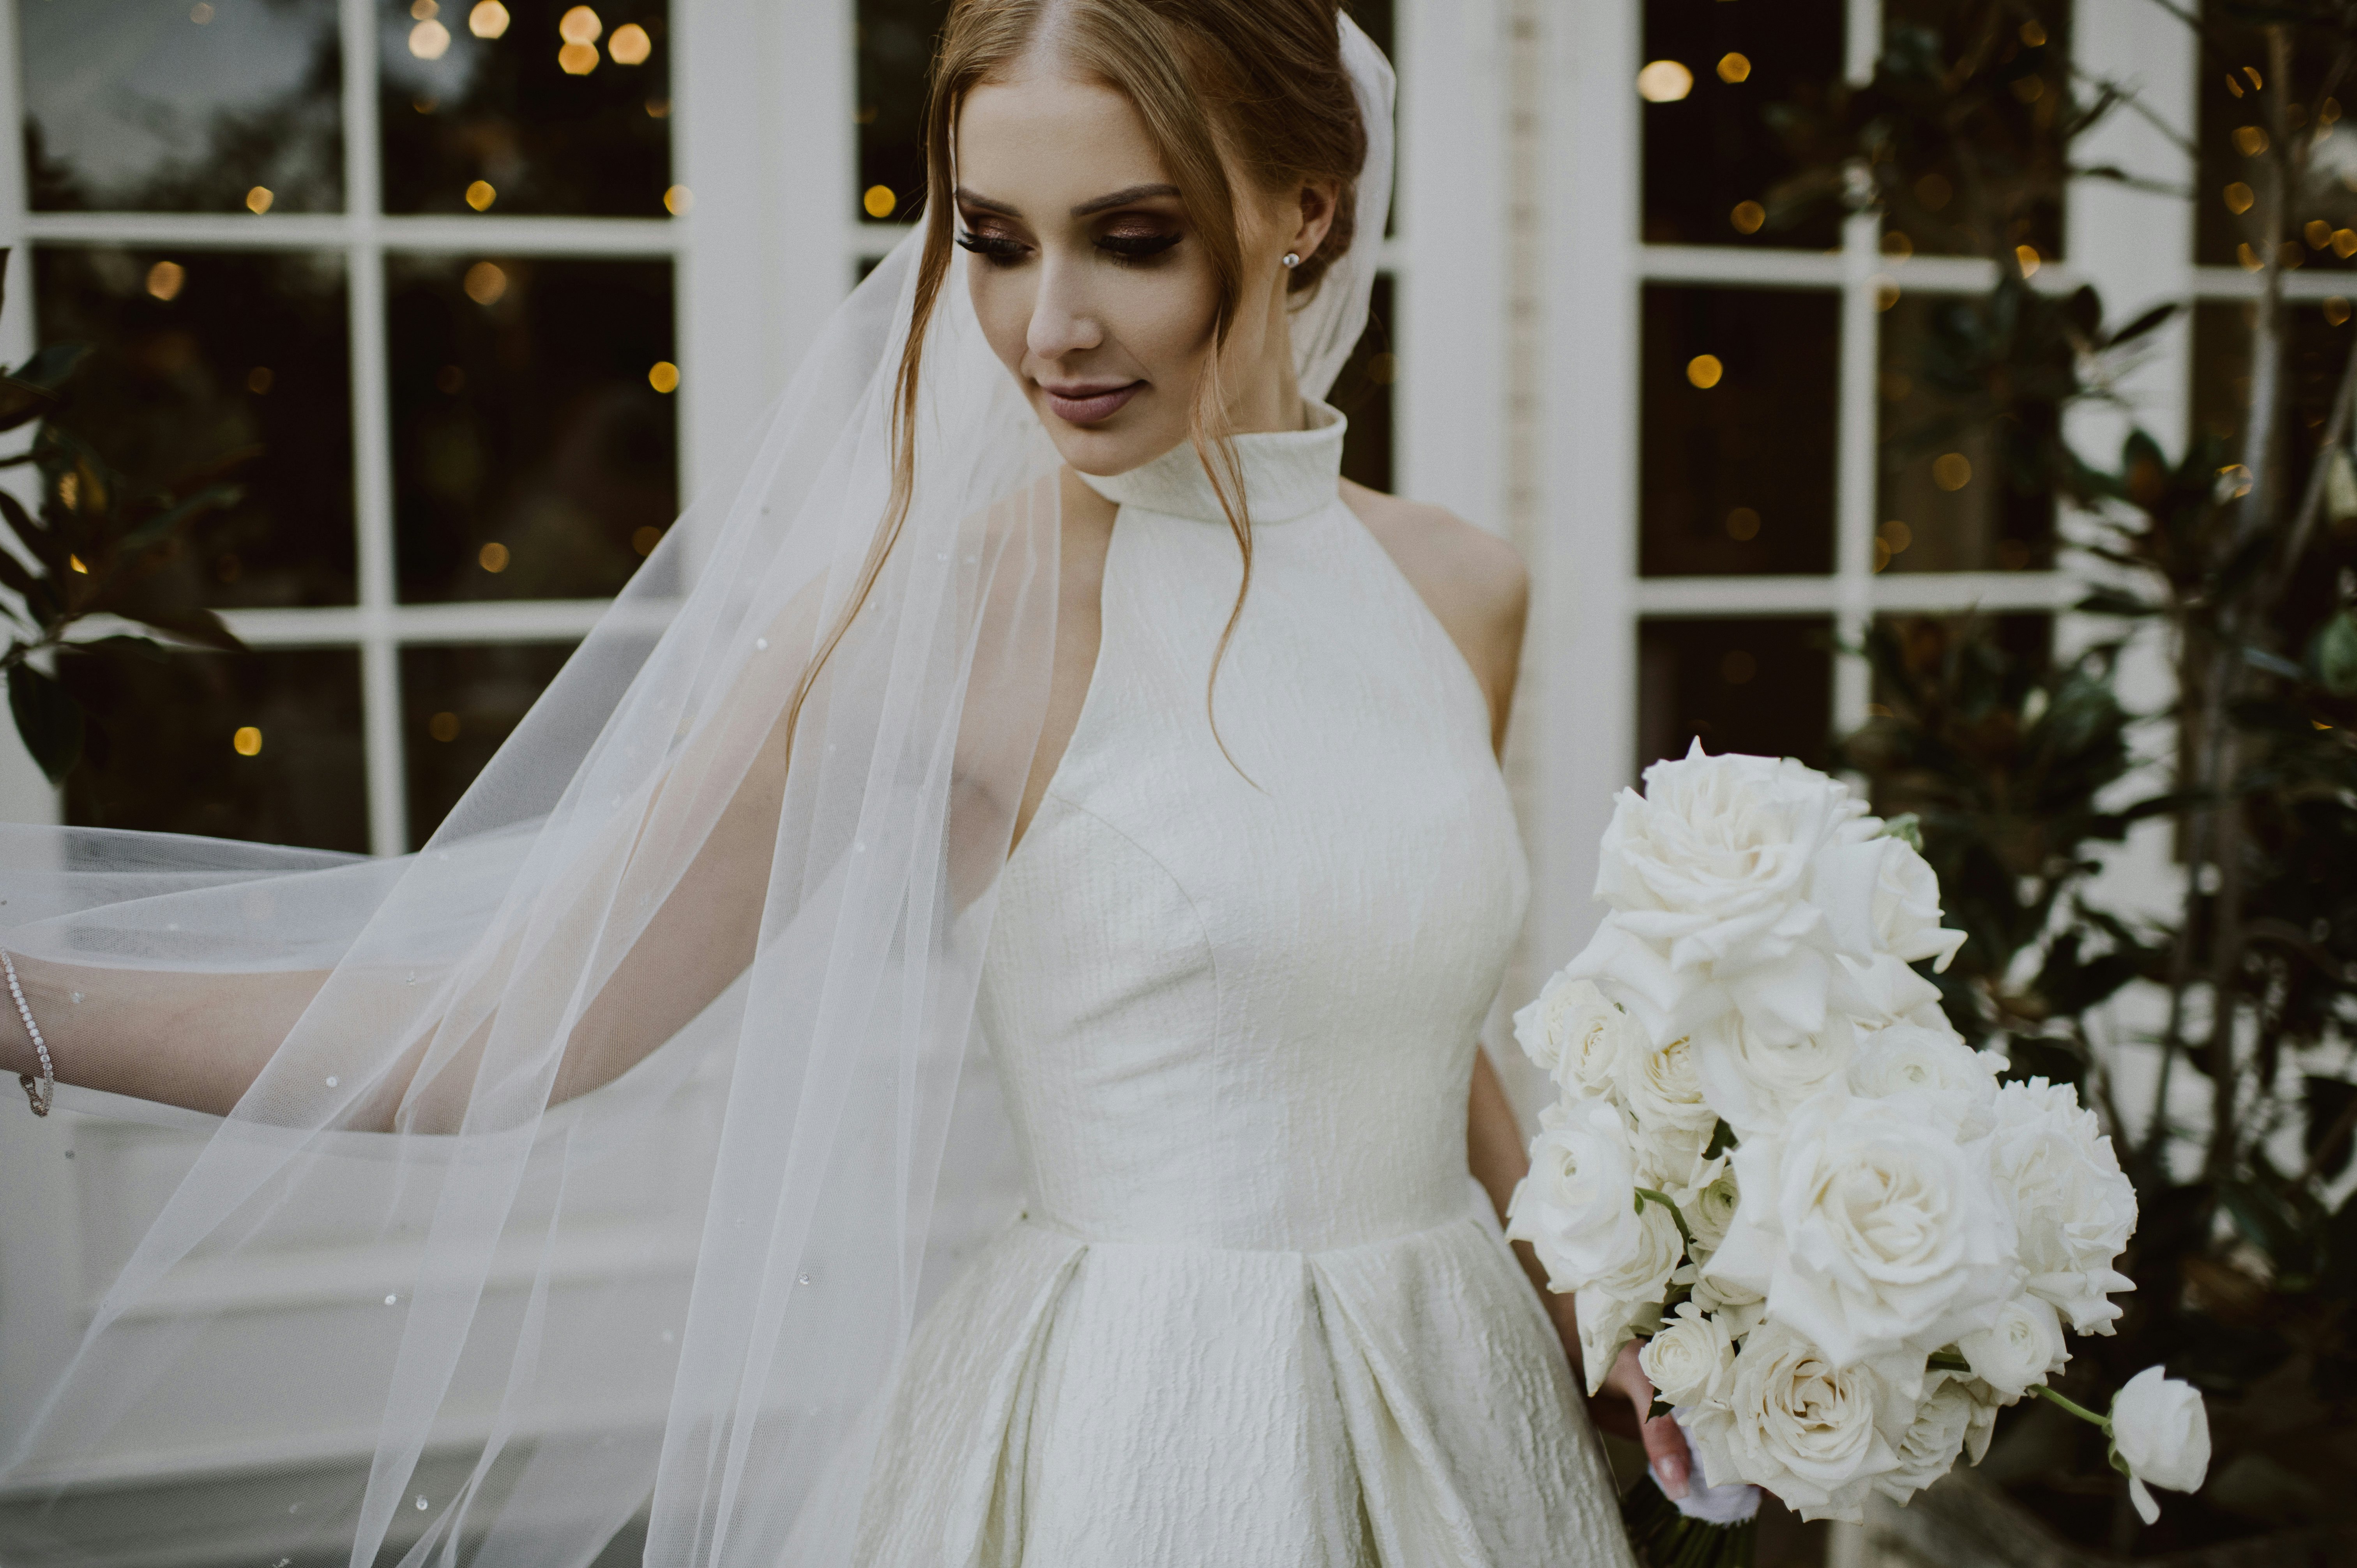 Bride with high neck dress holding bouquet 